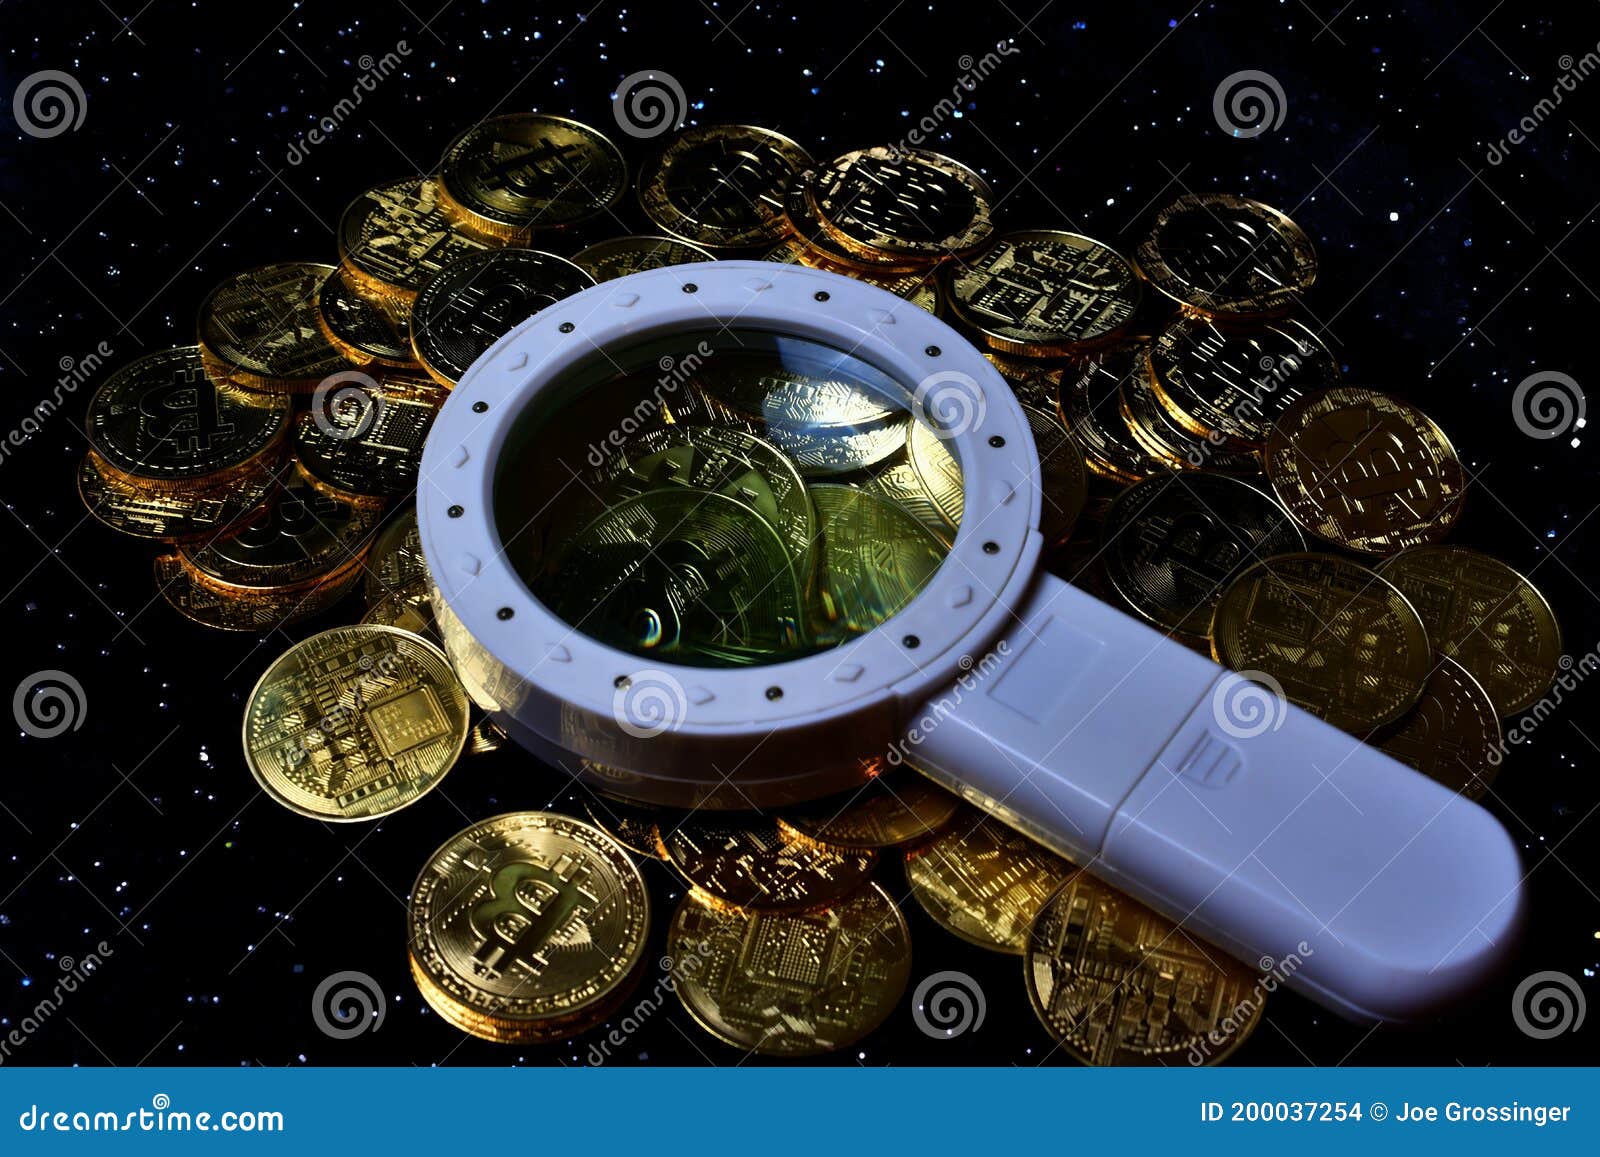 Magnifying glass with gold bar pile of gold coins under it Stock